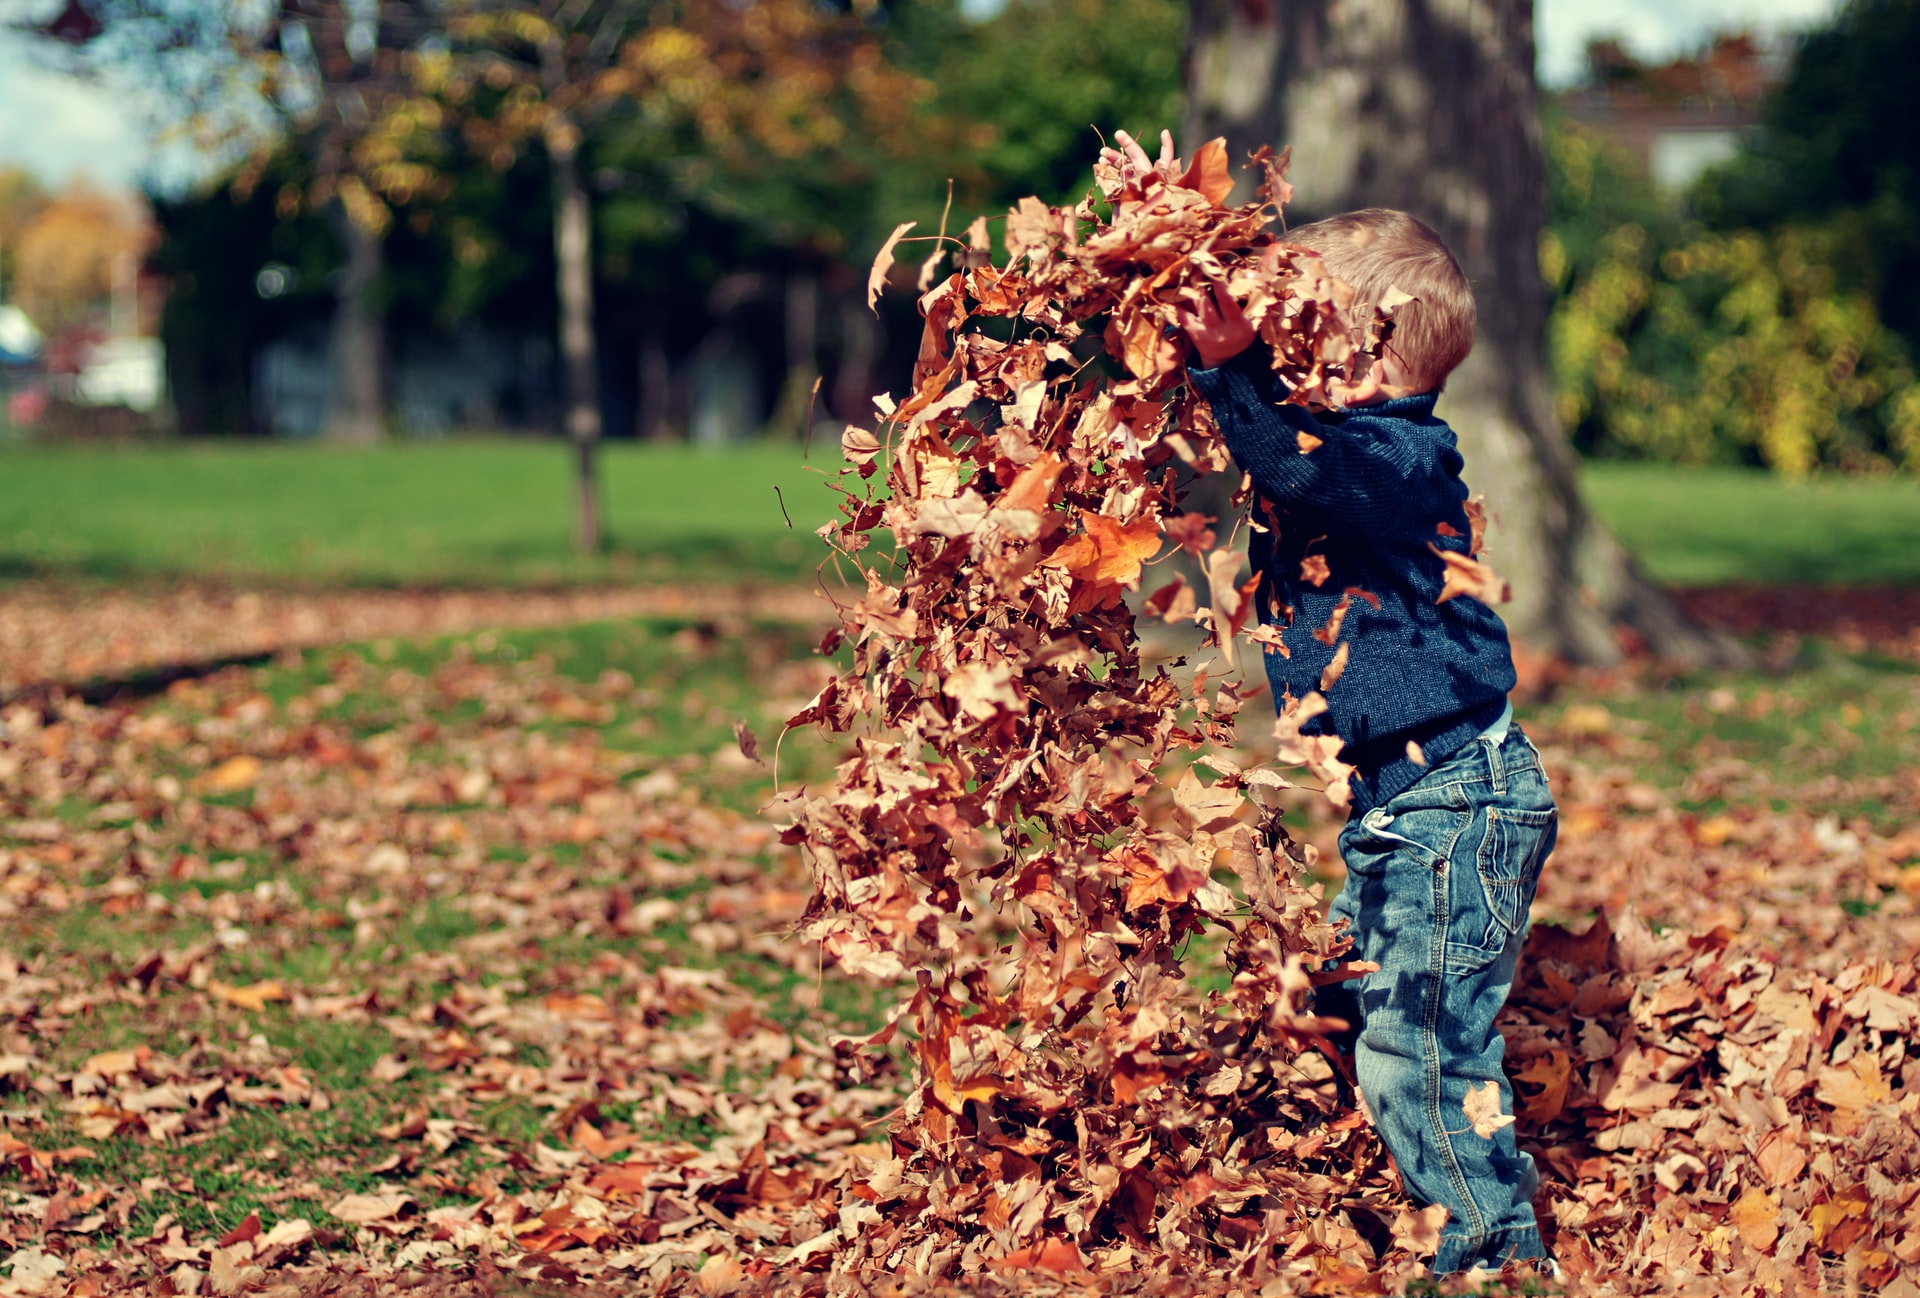 a young boy playing with dried leaves | image credit: Scott Webb via Unsplash.com